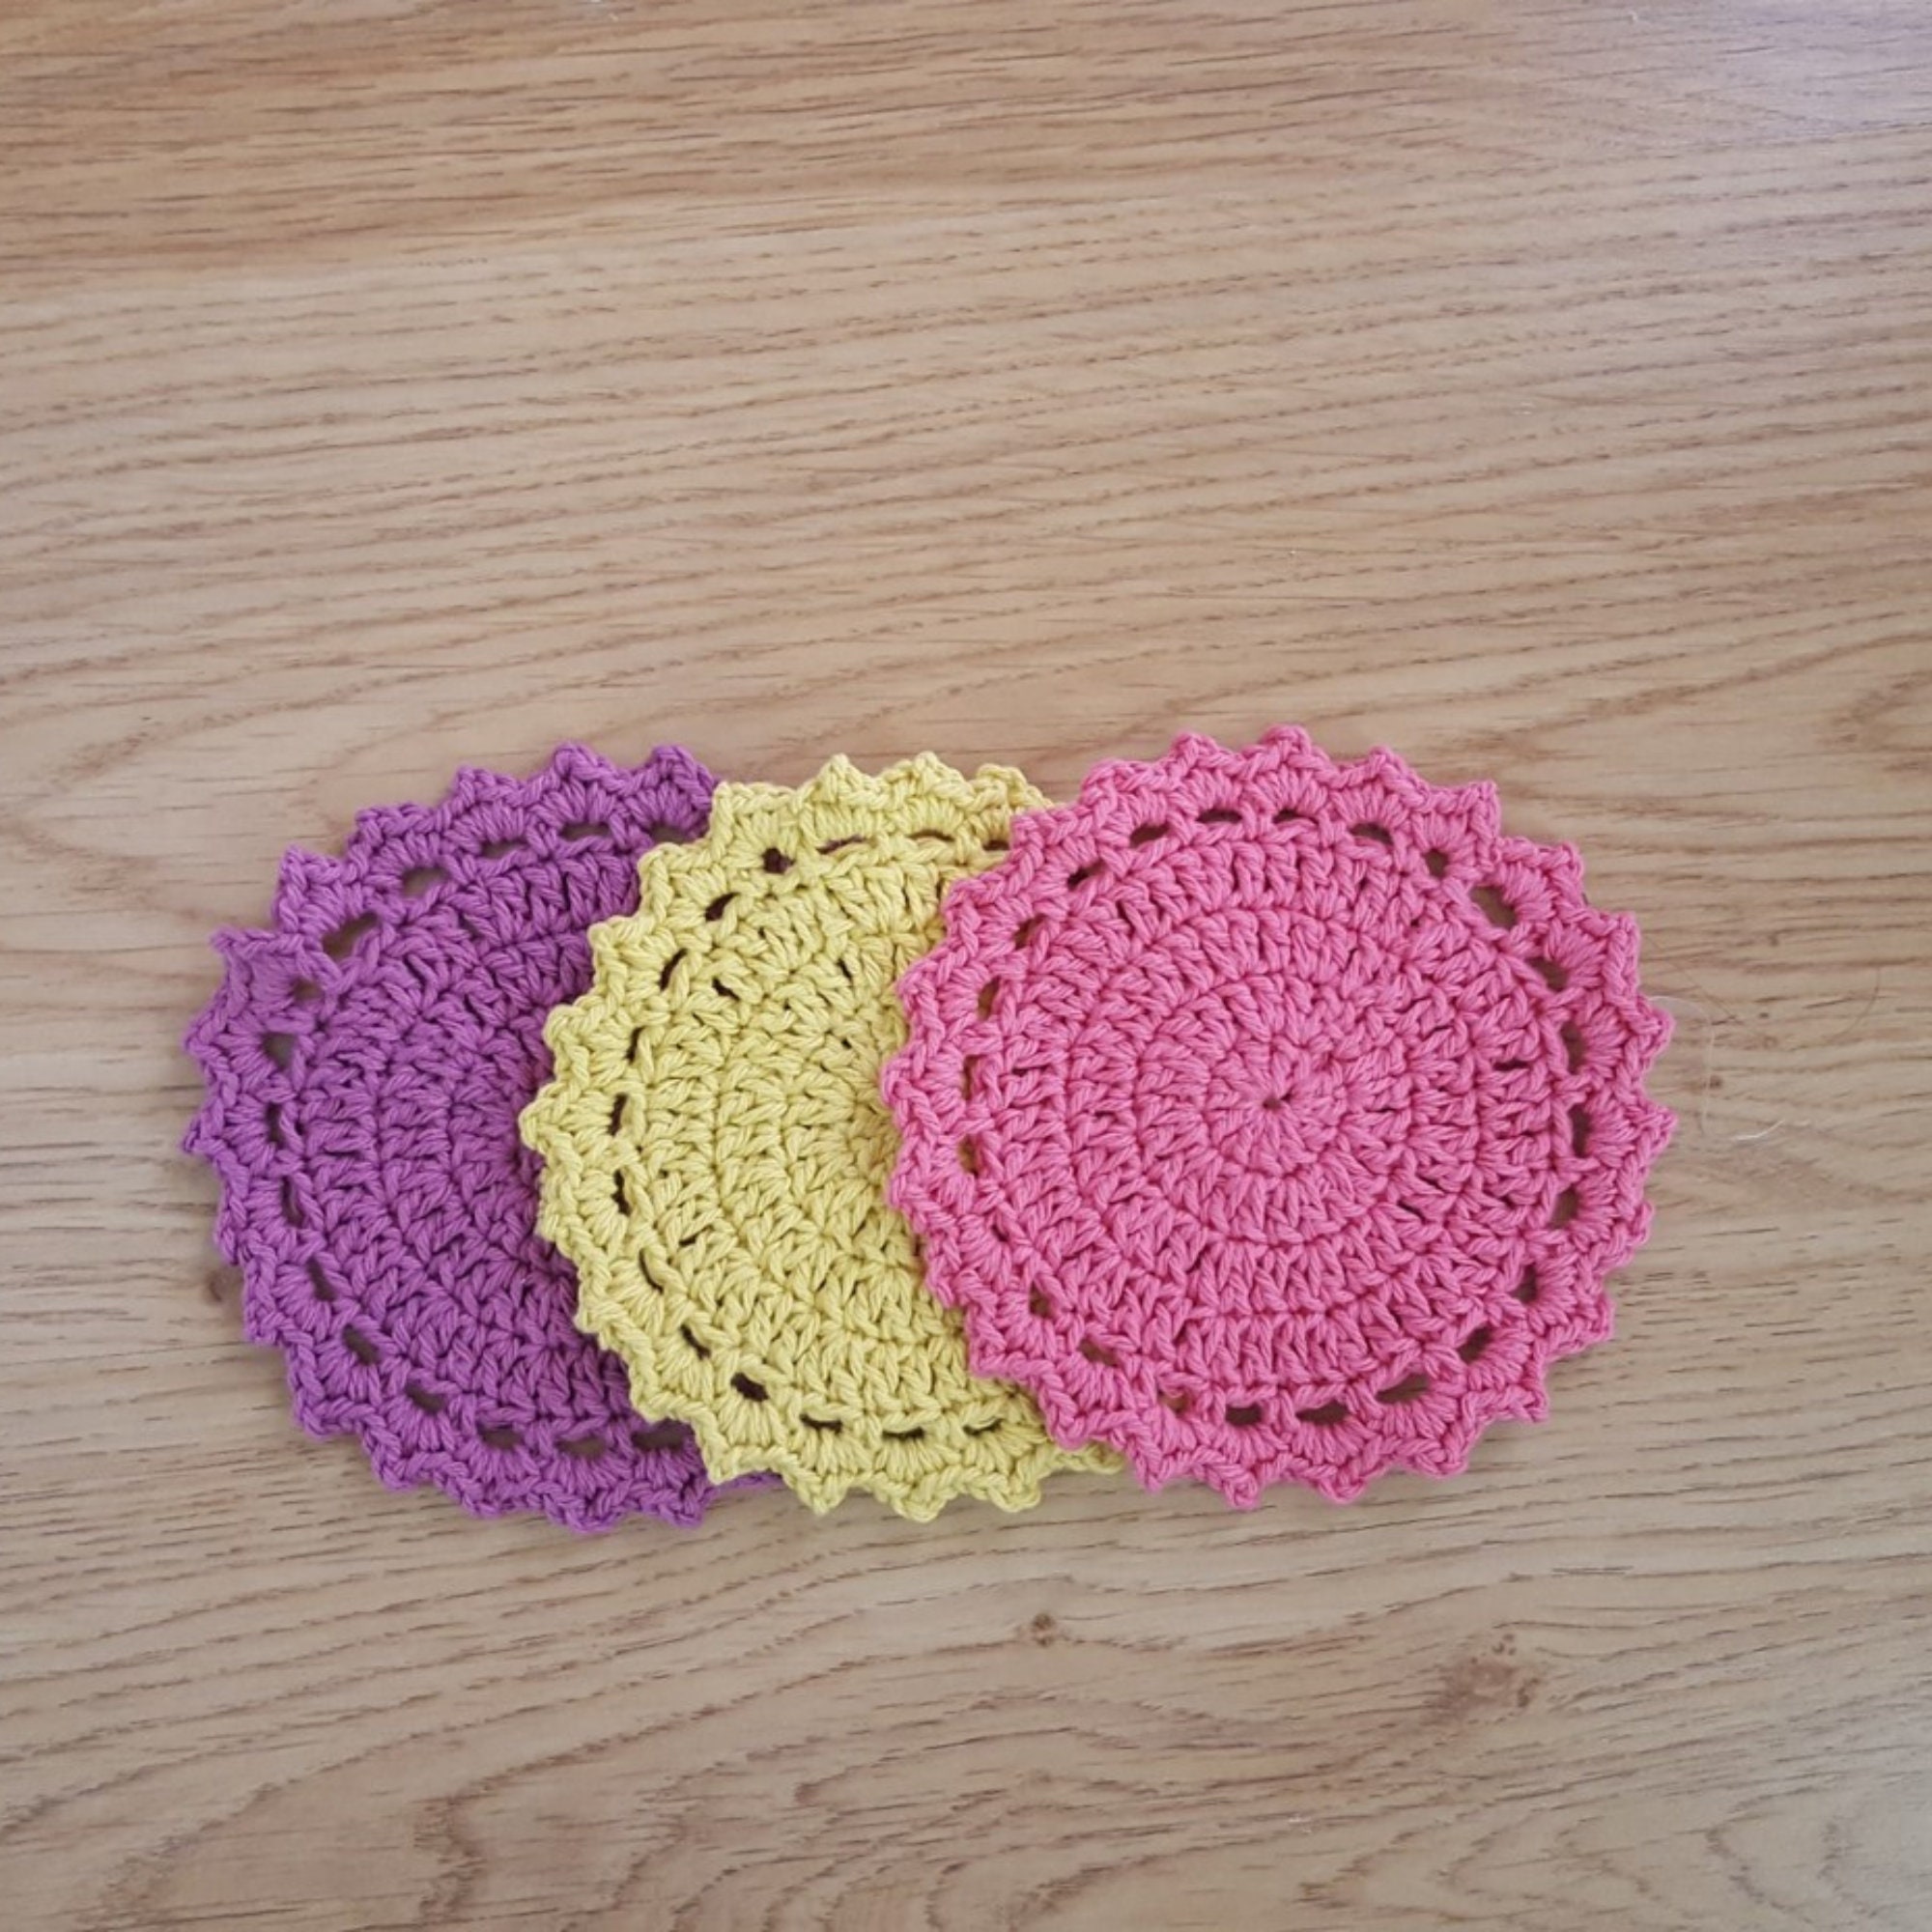 Cute coasters are the perfect evening crochet project